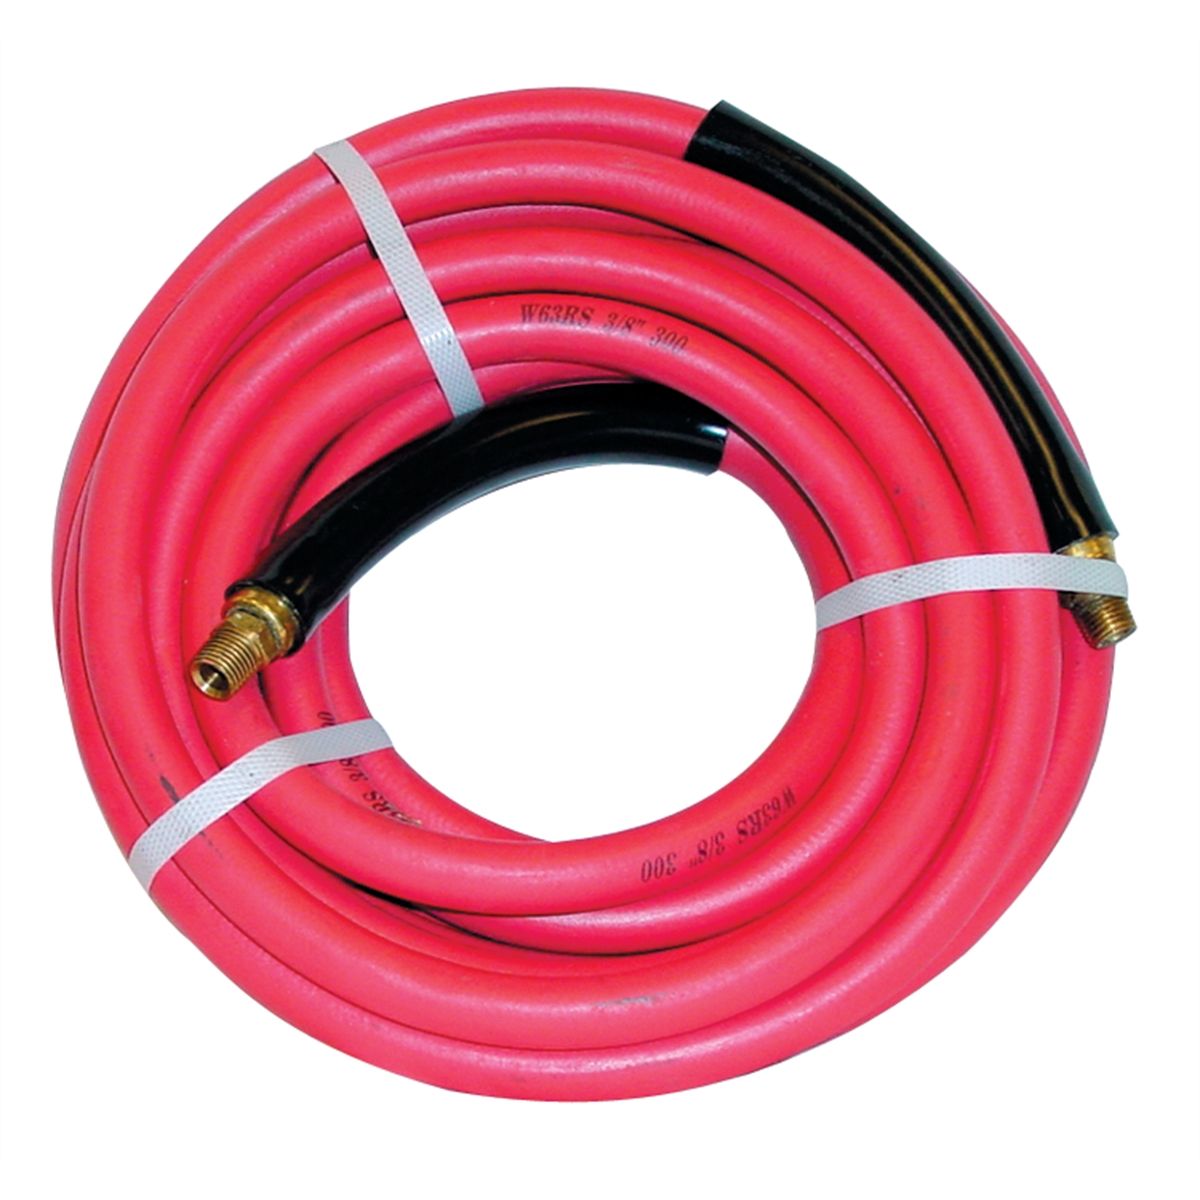 Rubber Air Hose - 2 Spiral - 25 Ft x 3/8 In ID